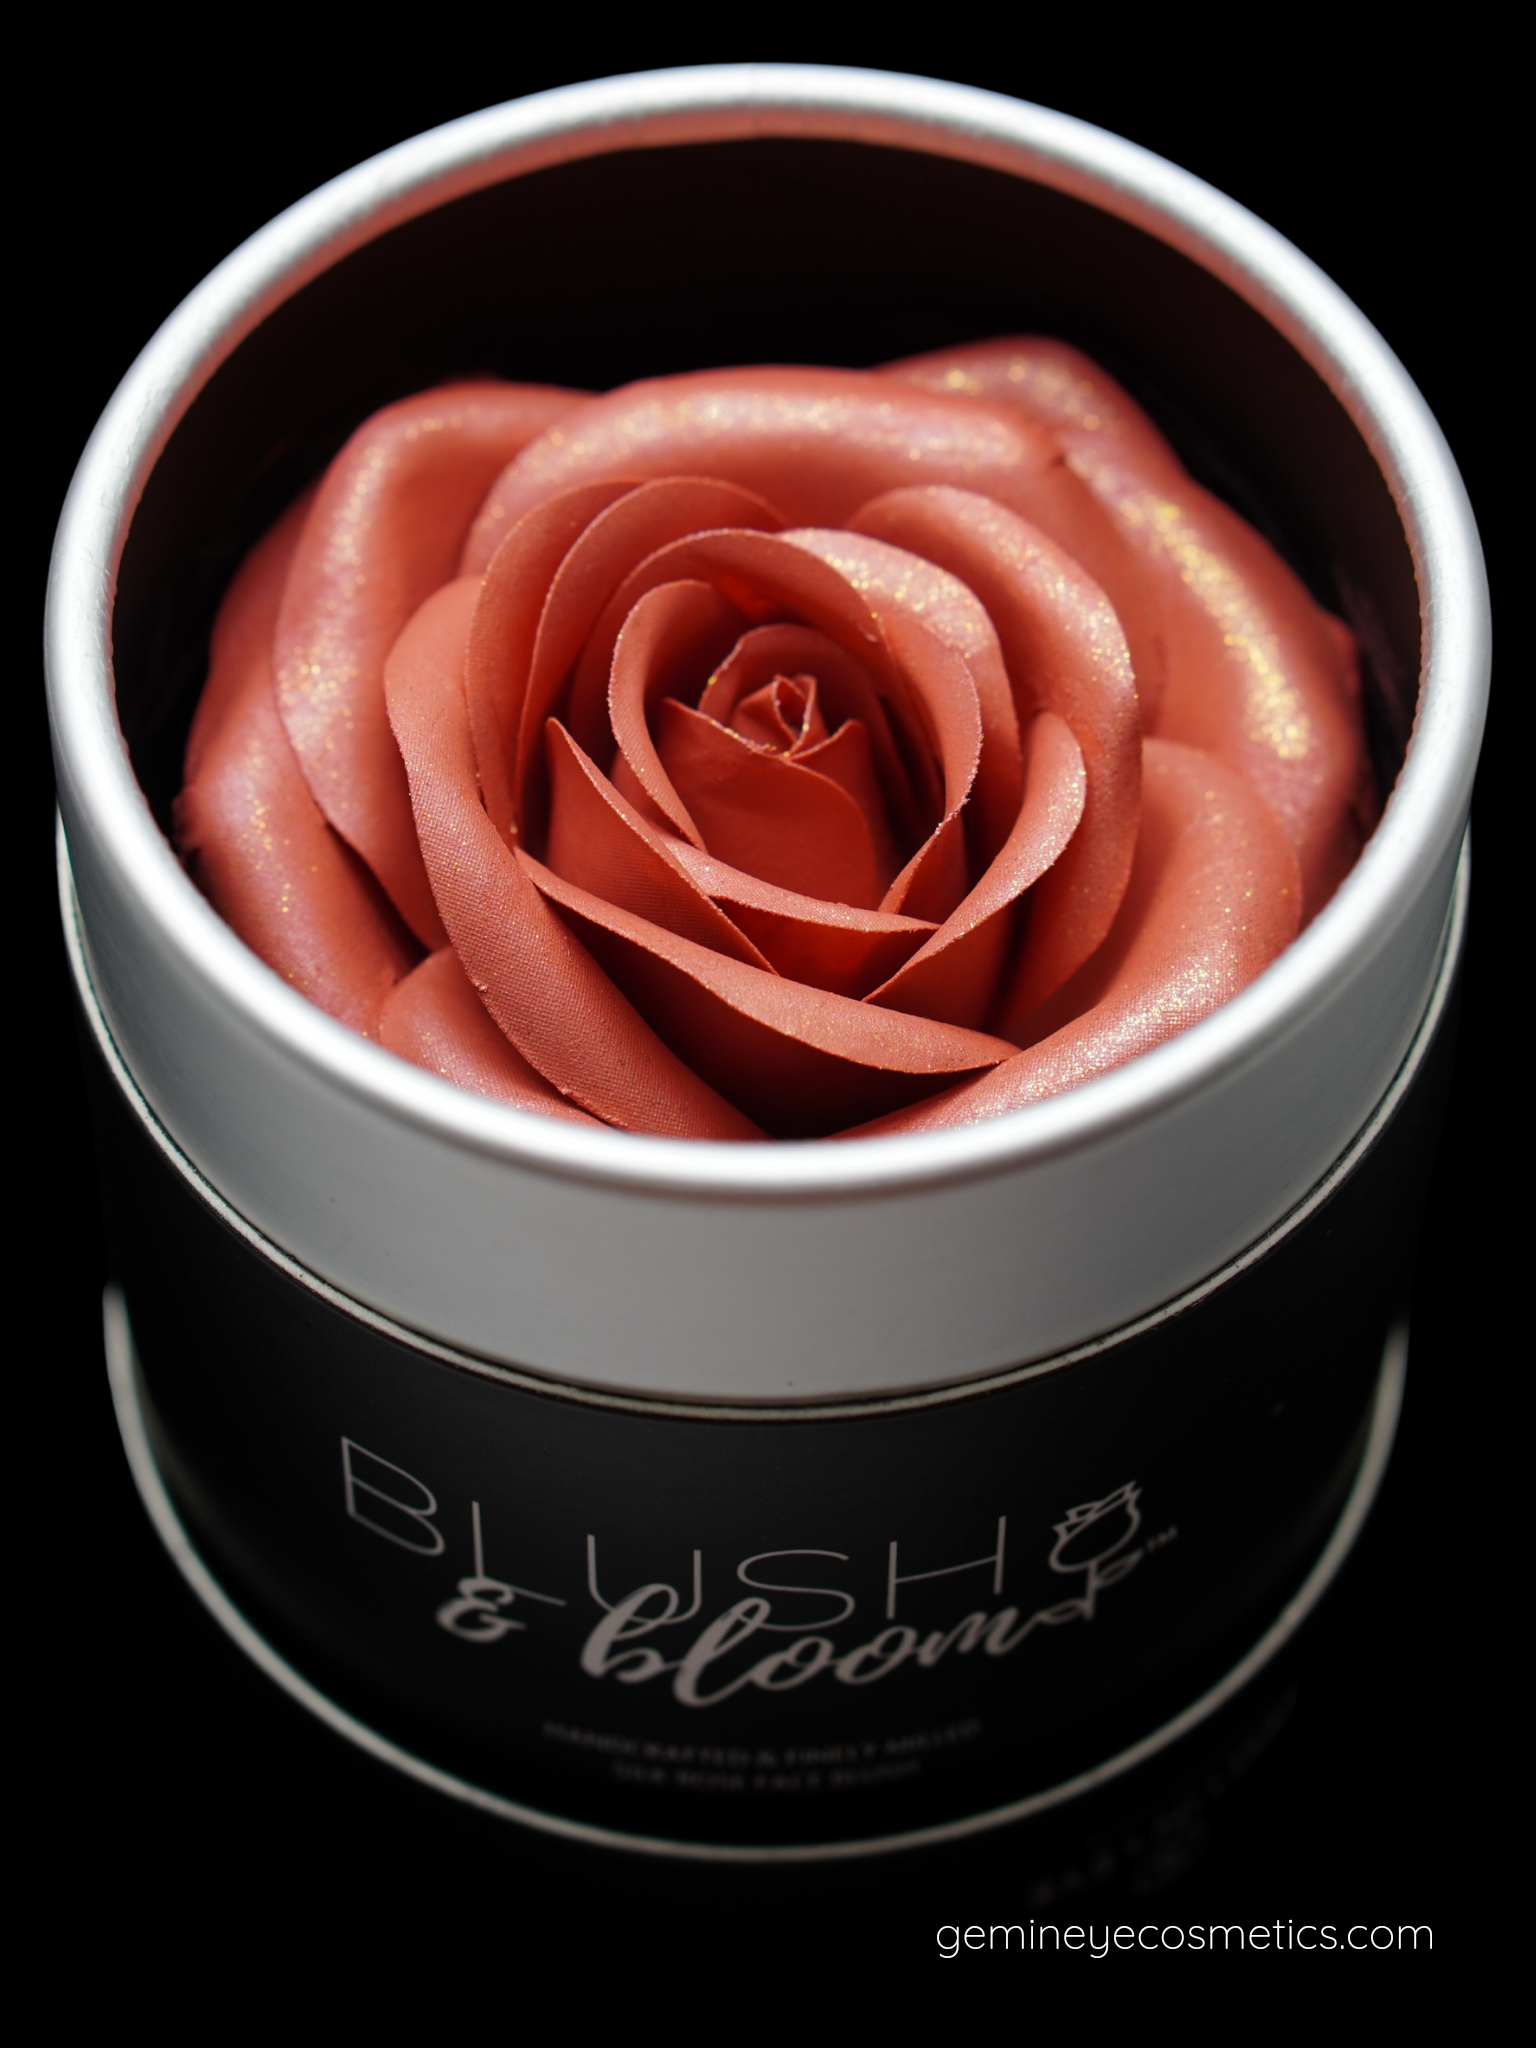 Blush&amp;Bloom™ is an Authentic Scented Rose Blush product designed by GEM IN EYE Cosmetics. This shade is Flirty in pale peach color. It is highly pigmented and buildable great for light to fair skin tones. Best for medium to dark skin with a matte-to-shimmer finish. It will give you that “Natural Dewy Glow”. These rose blushes were first introduced in the beauty industry in NEW YORK FASHION WEEK September 2022 Edition